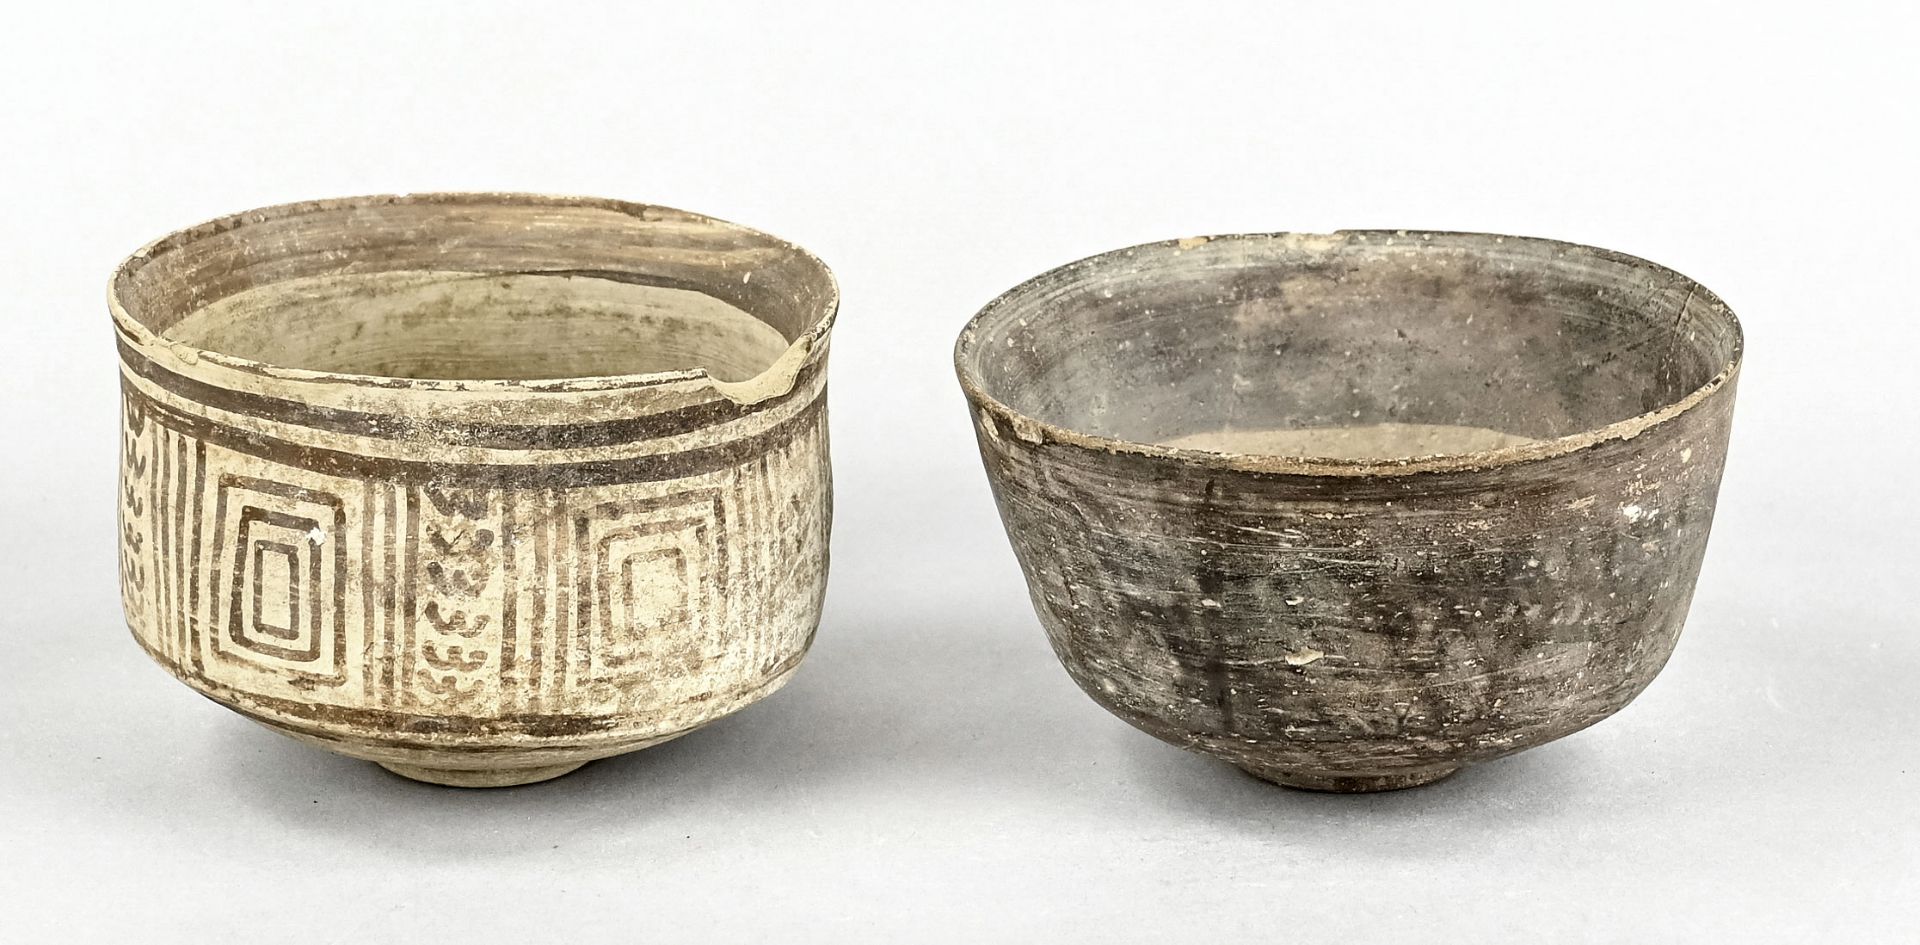 Drinking bowl, probably Anatolia, geometric decorations, 6 x 8,5 cm and 5,2 x 9,5 cm respectively